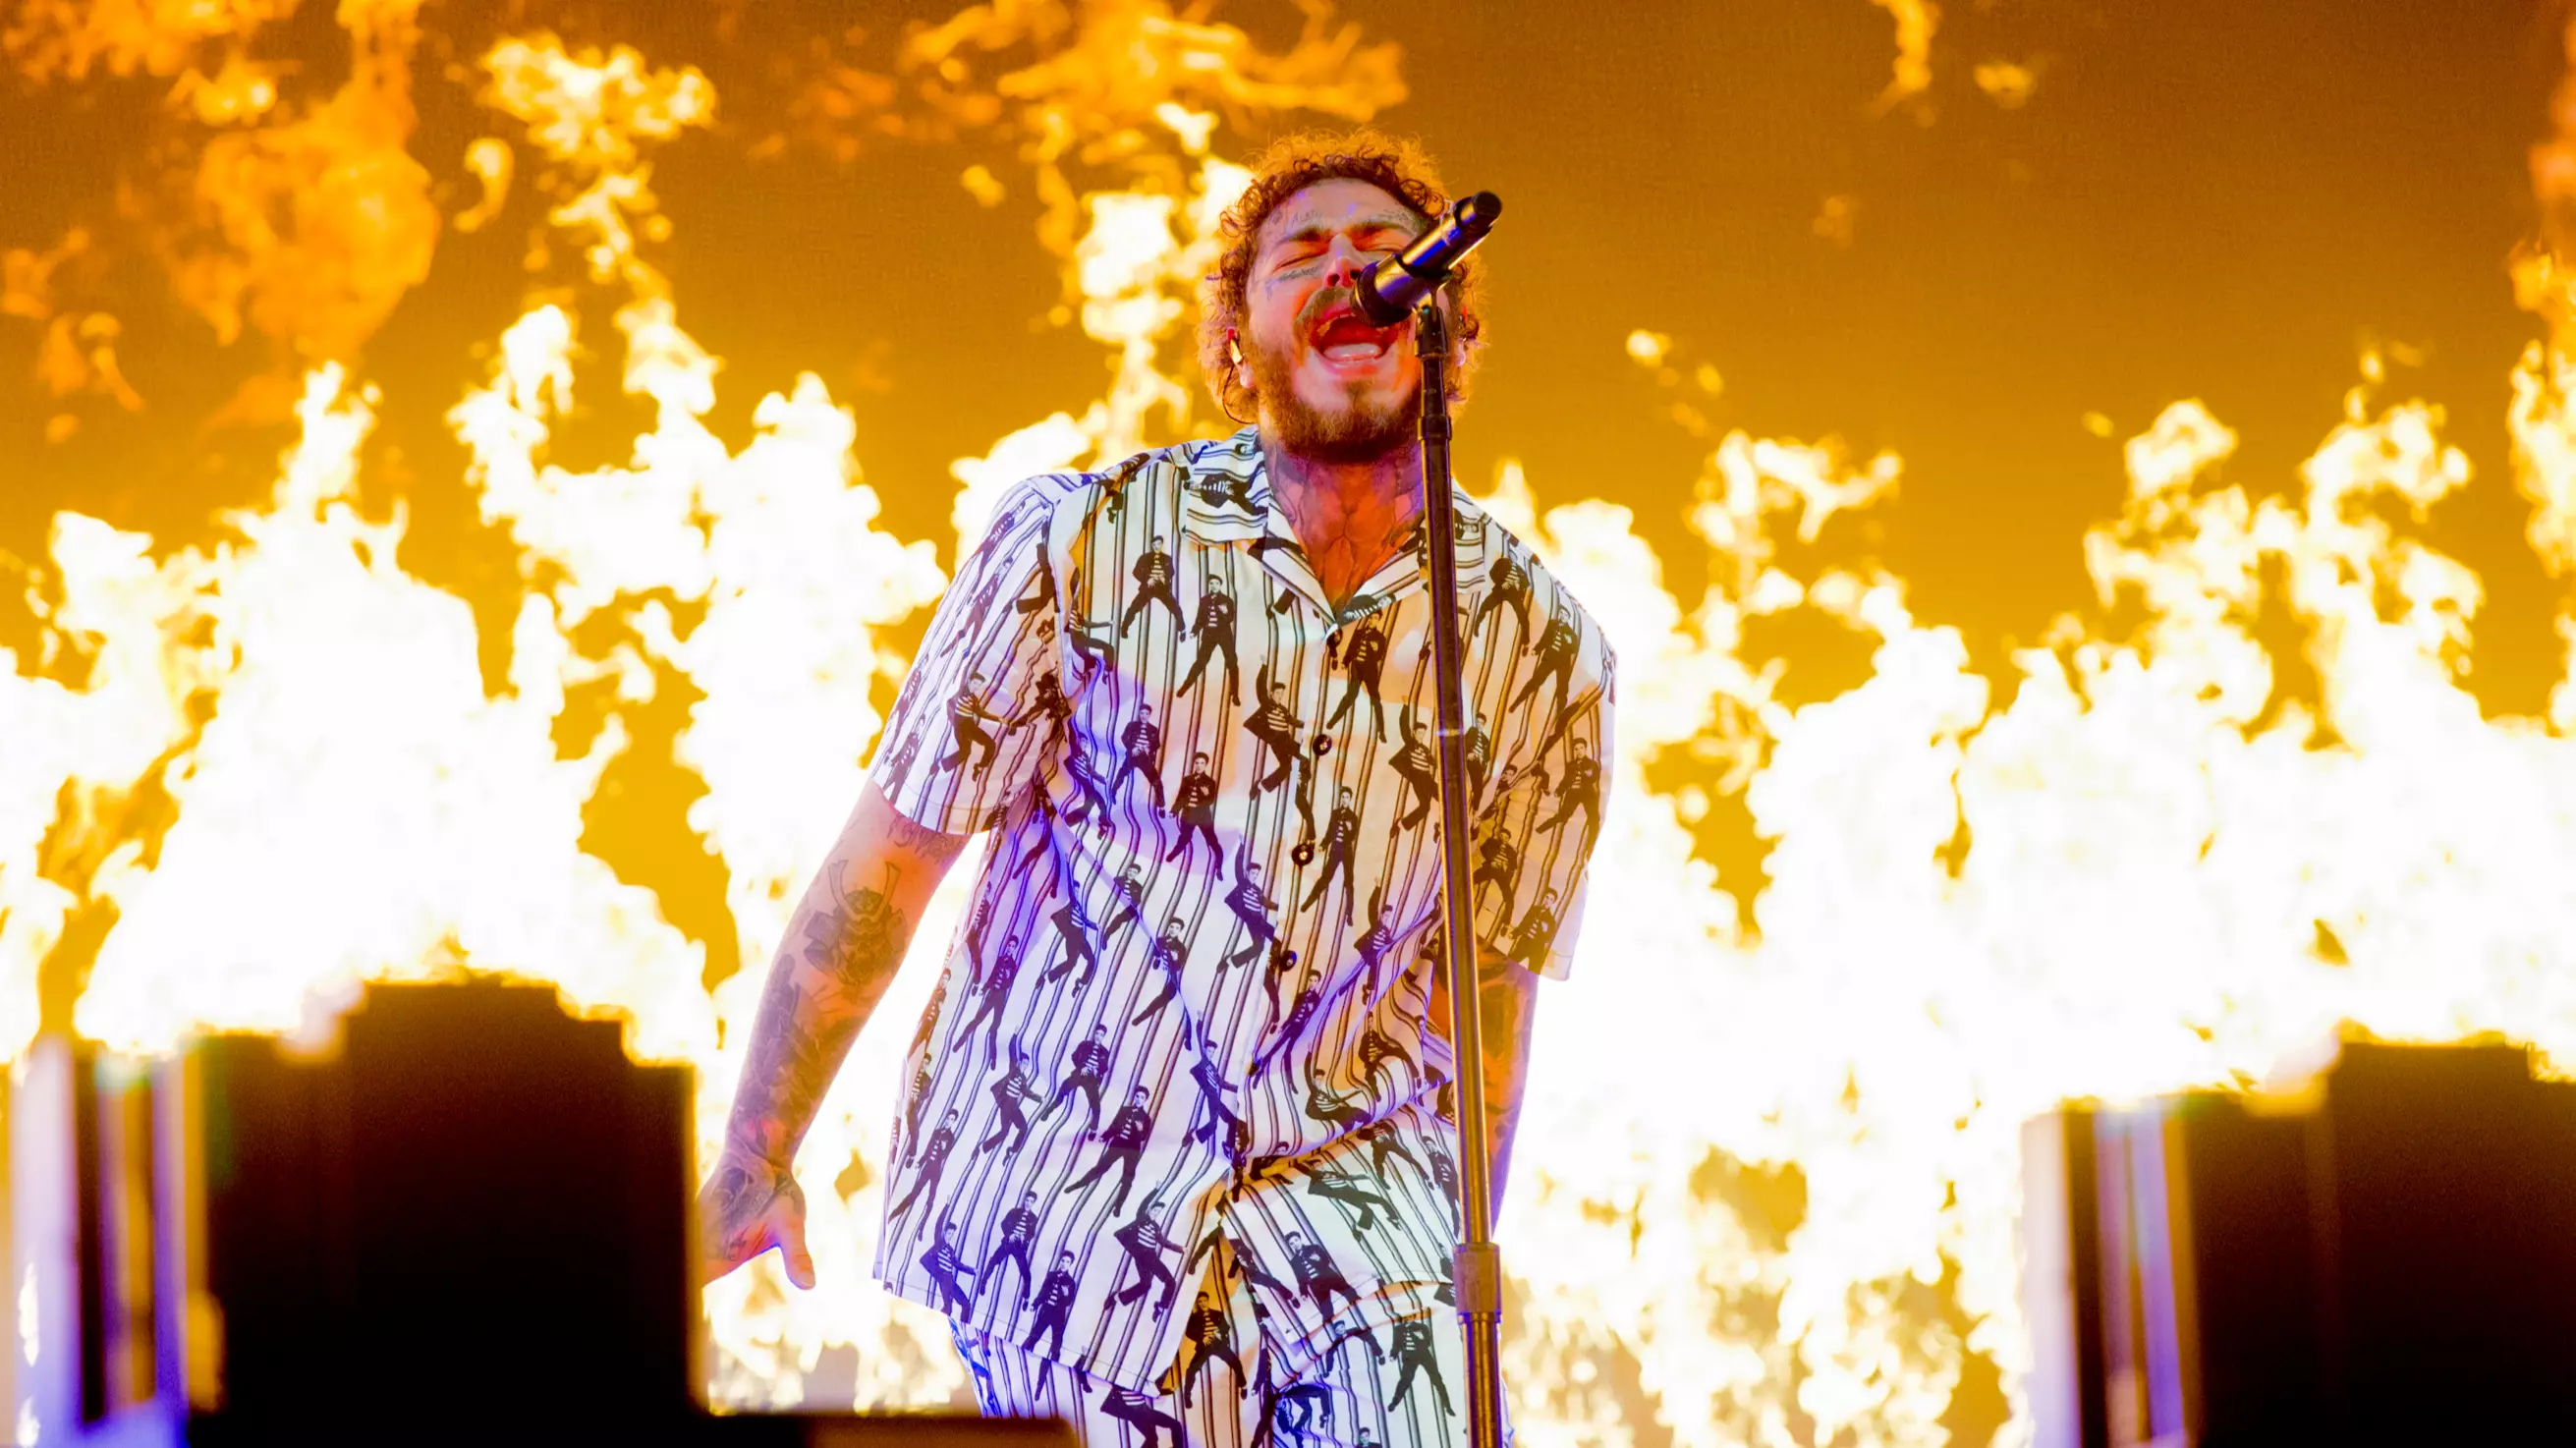 Post Malone's Reaction To Being Flashed At Gig Becomes Instant Meme